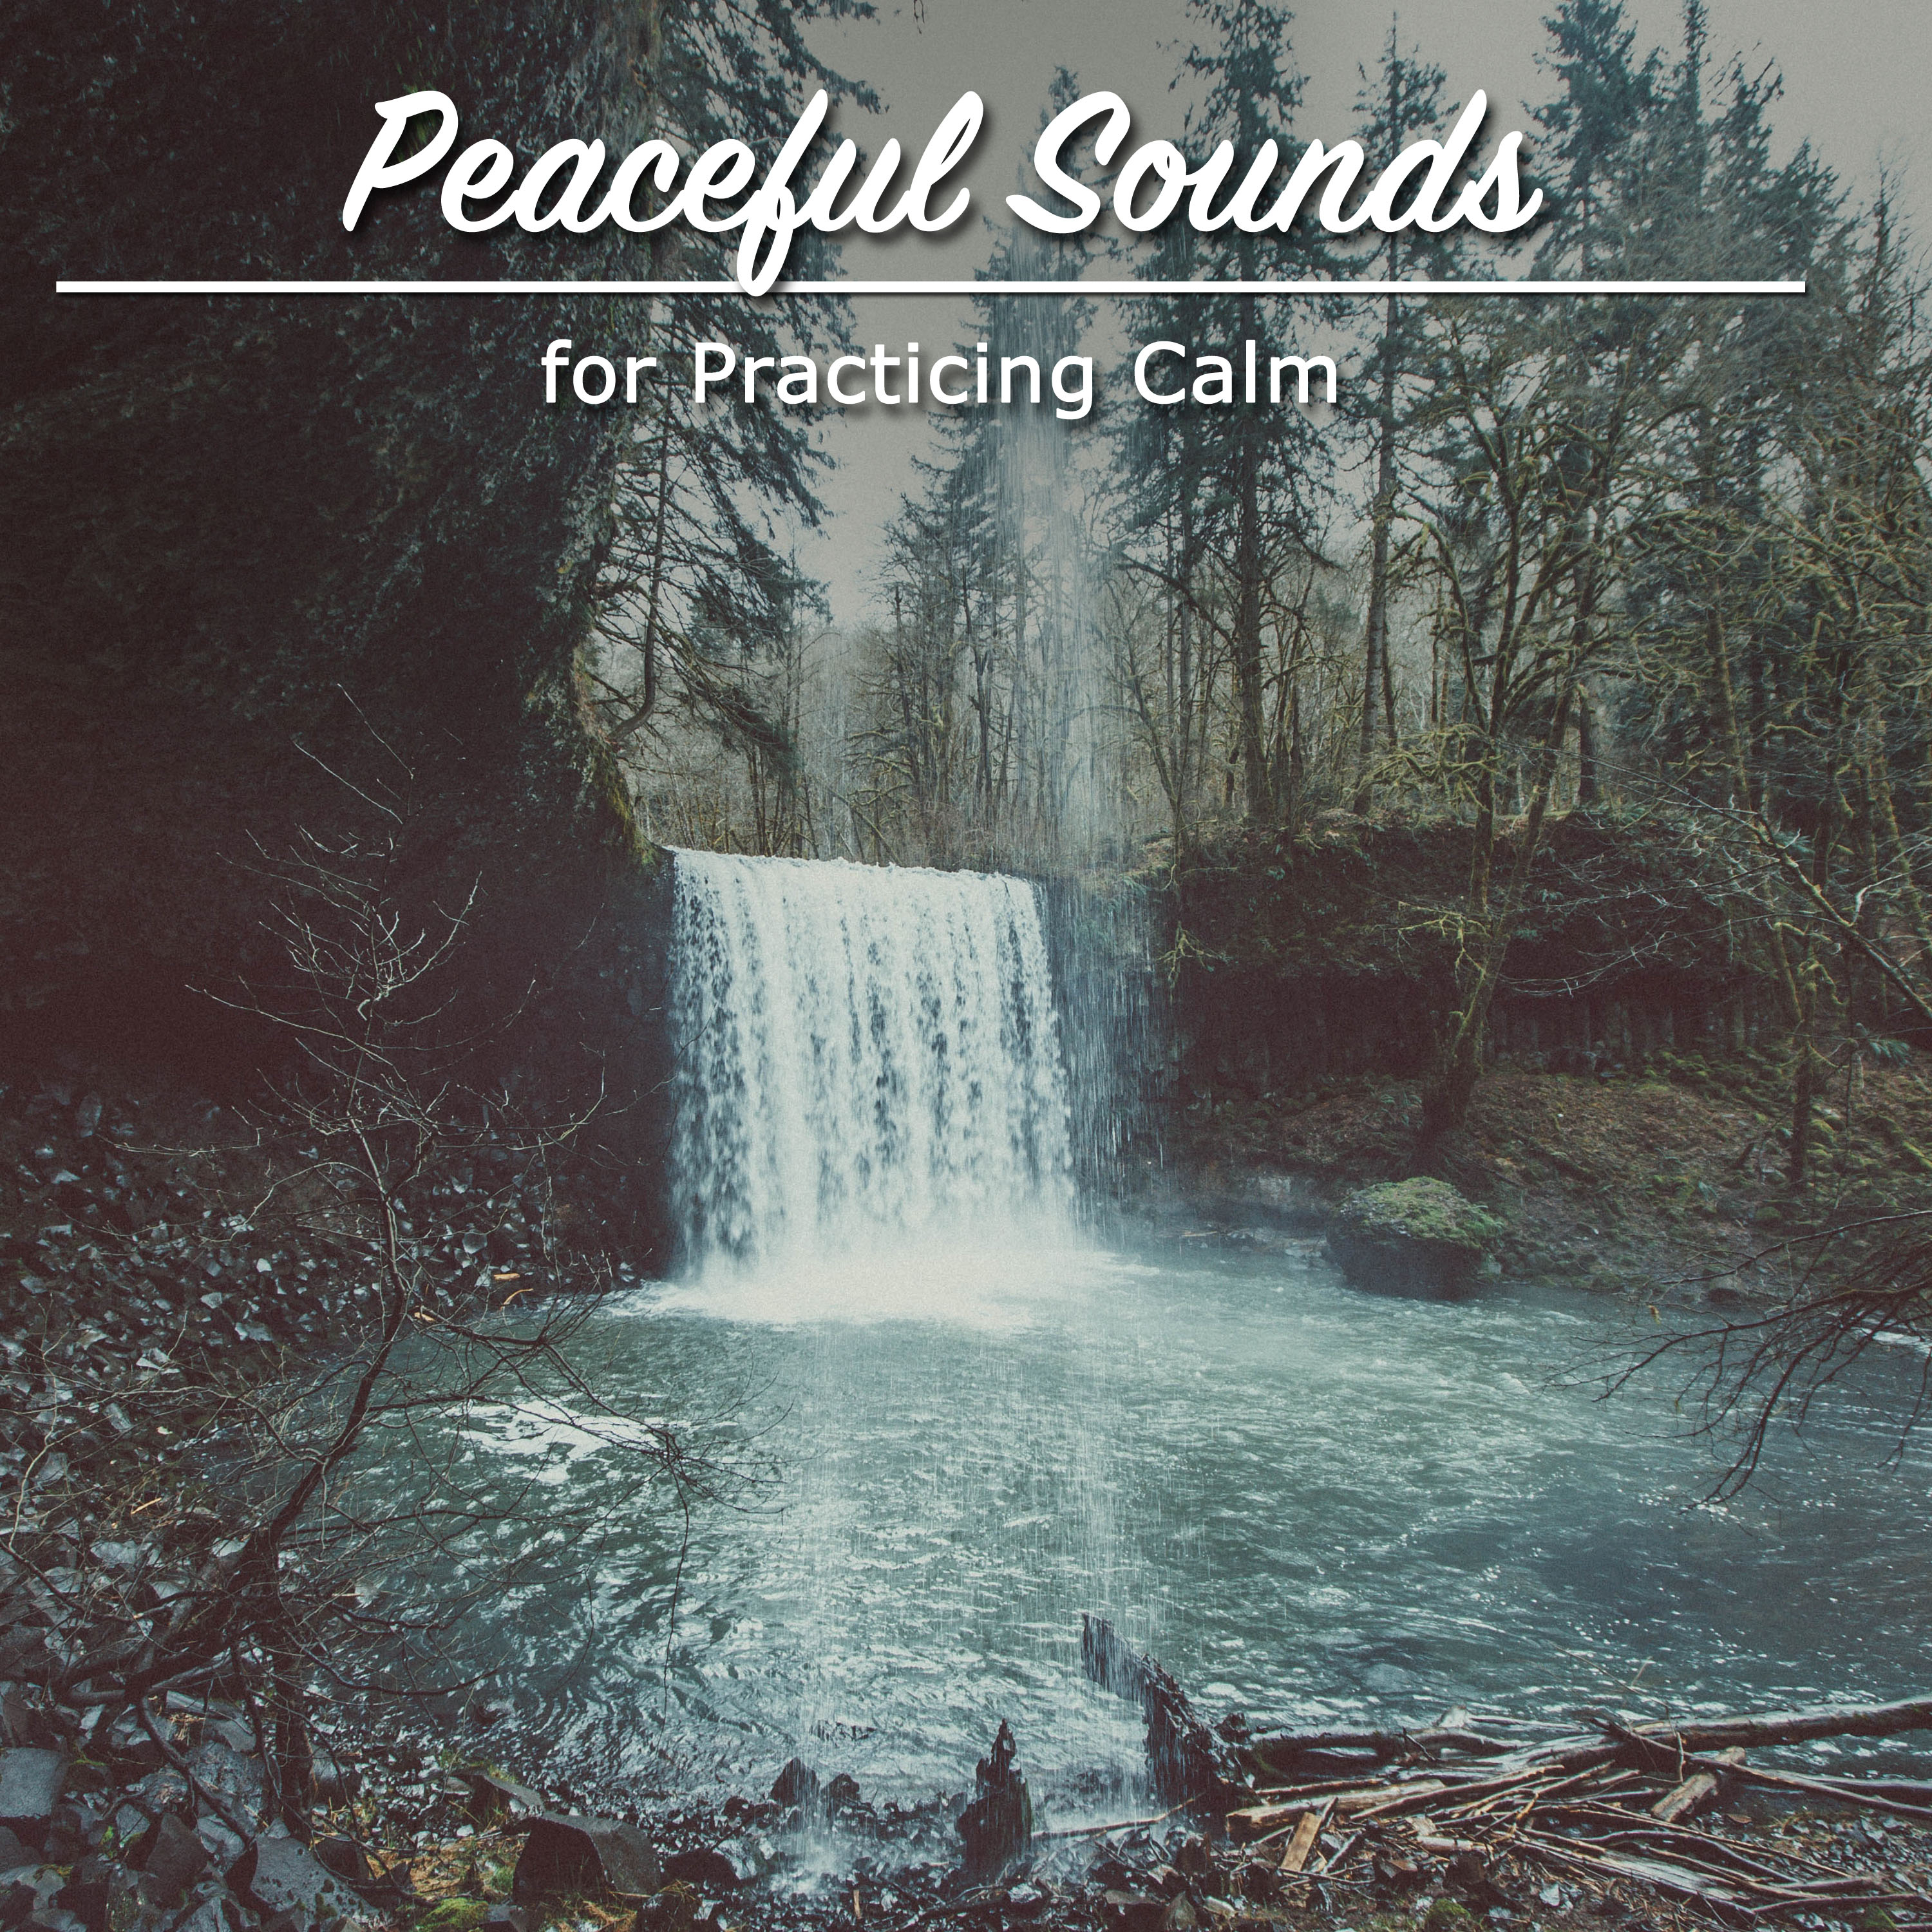 11 Naturally Calming Tracks to Relax